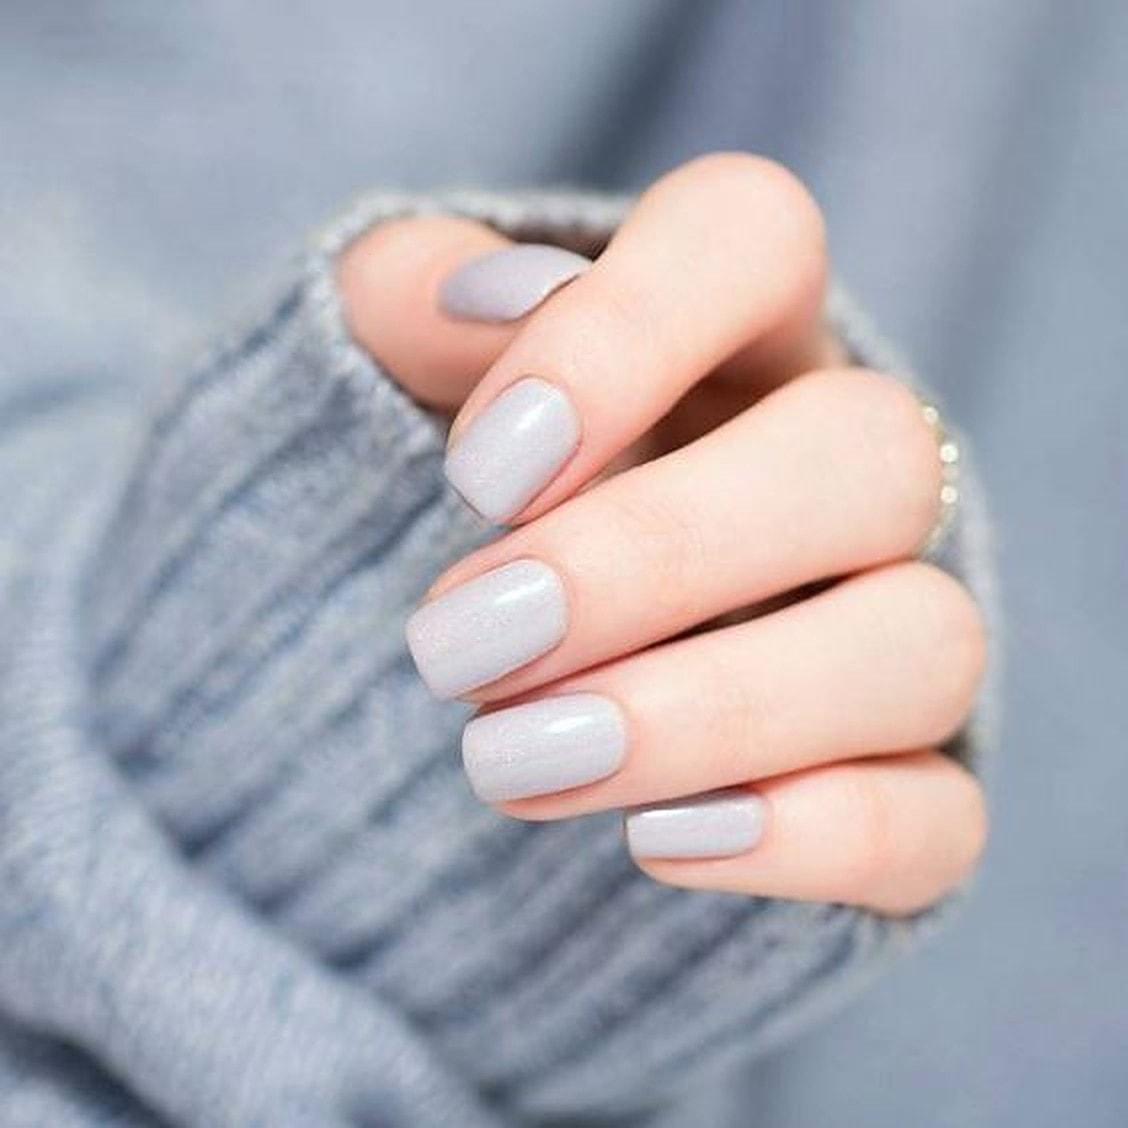 Top Neutral Nail Polish Colors for Every Skin Tone - An Unblurred Lady